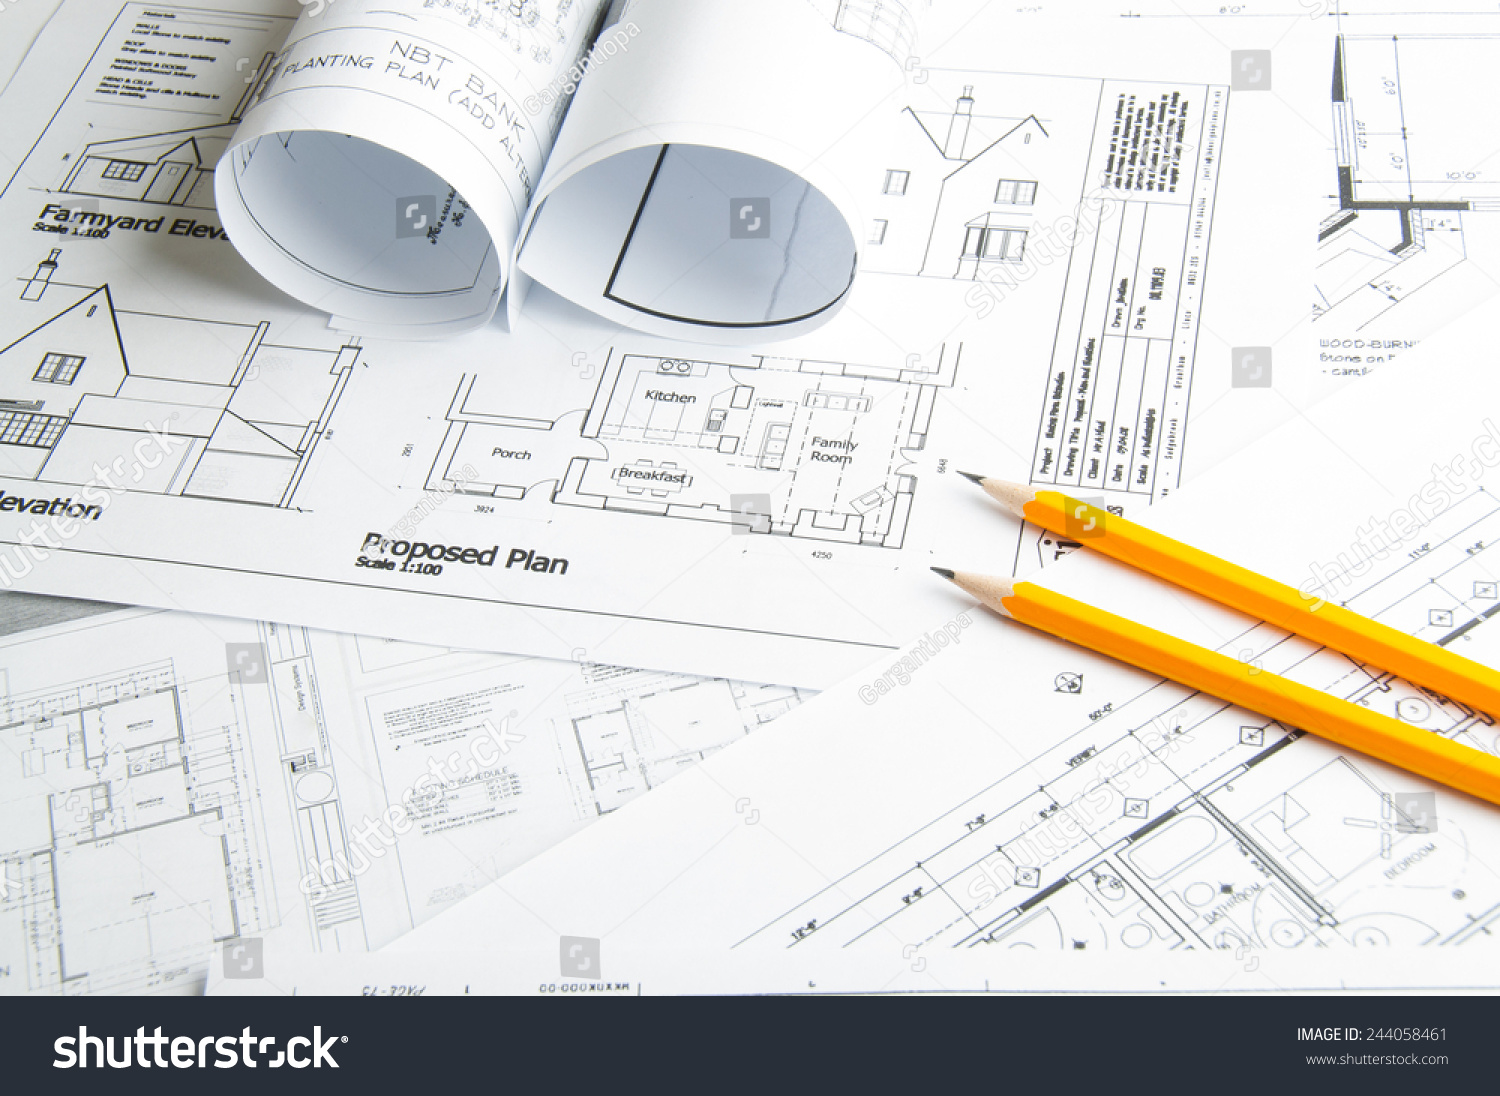 Architectural blueprints and blueprint rolls and two yellow pencils #244058461